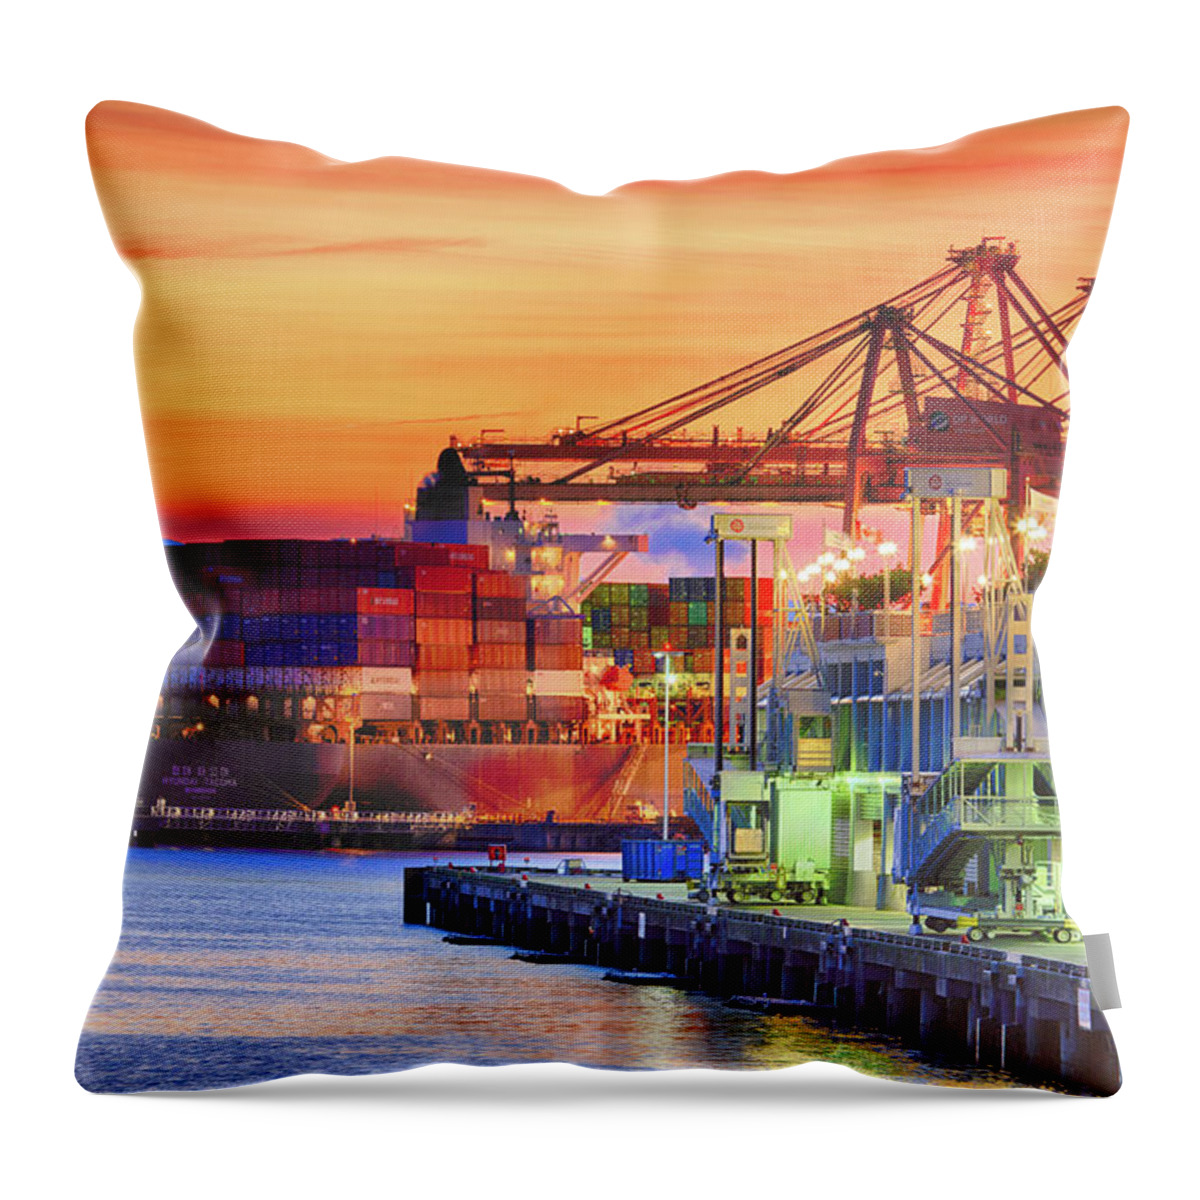 British Columbia Throw Pillow featuring the photograph Shipping Sunrise by Briand Sanderson